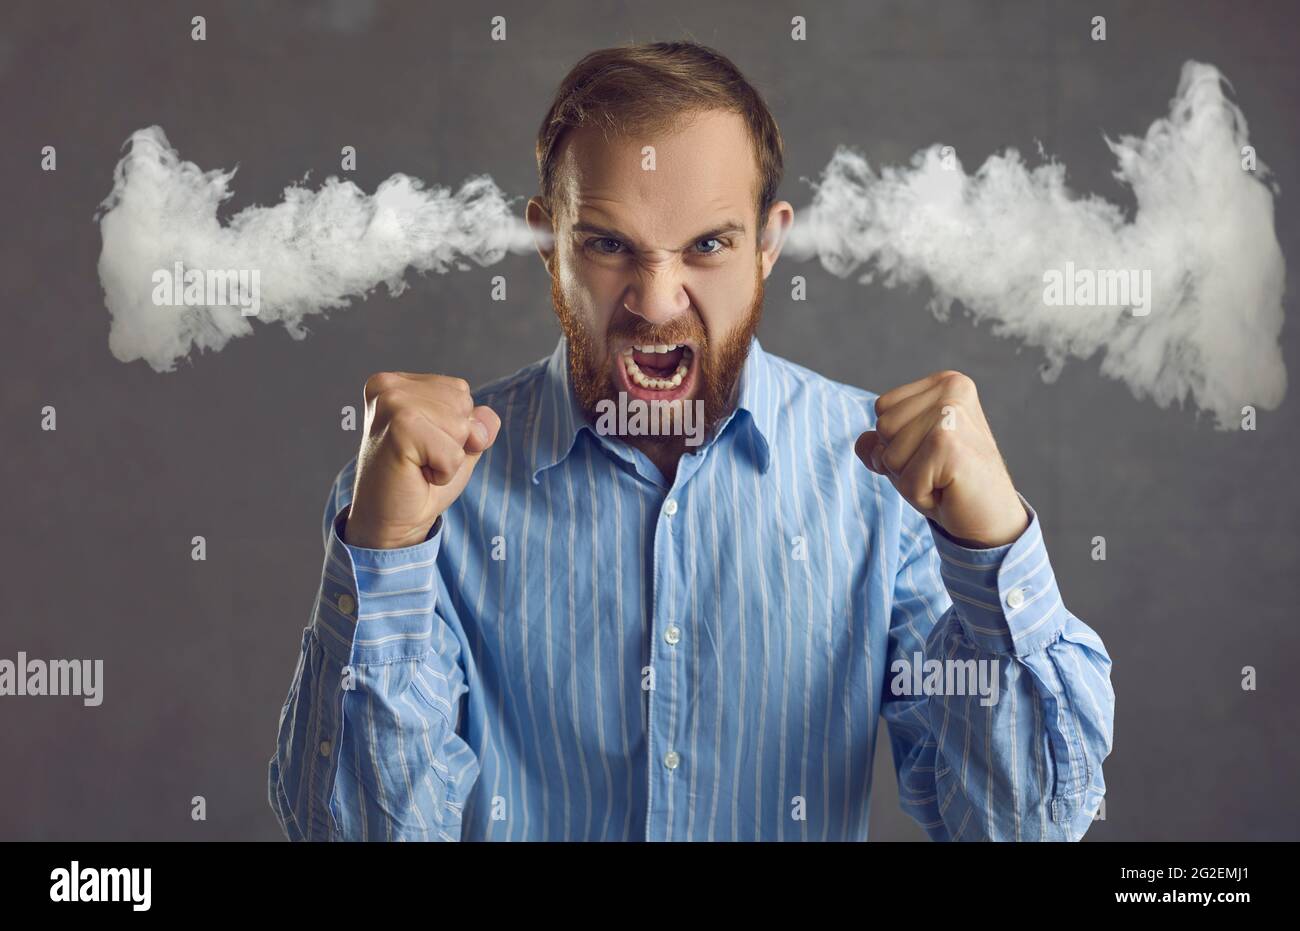 Angry business man shouting with steam coming out of ears isolated on grey background Stock Photo